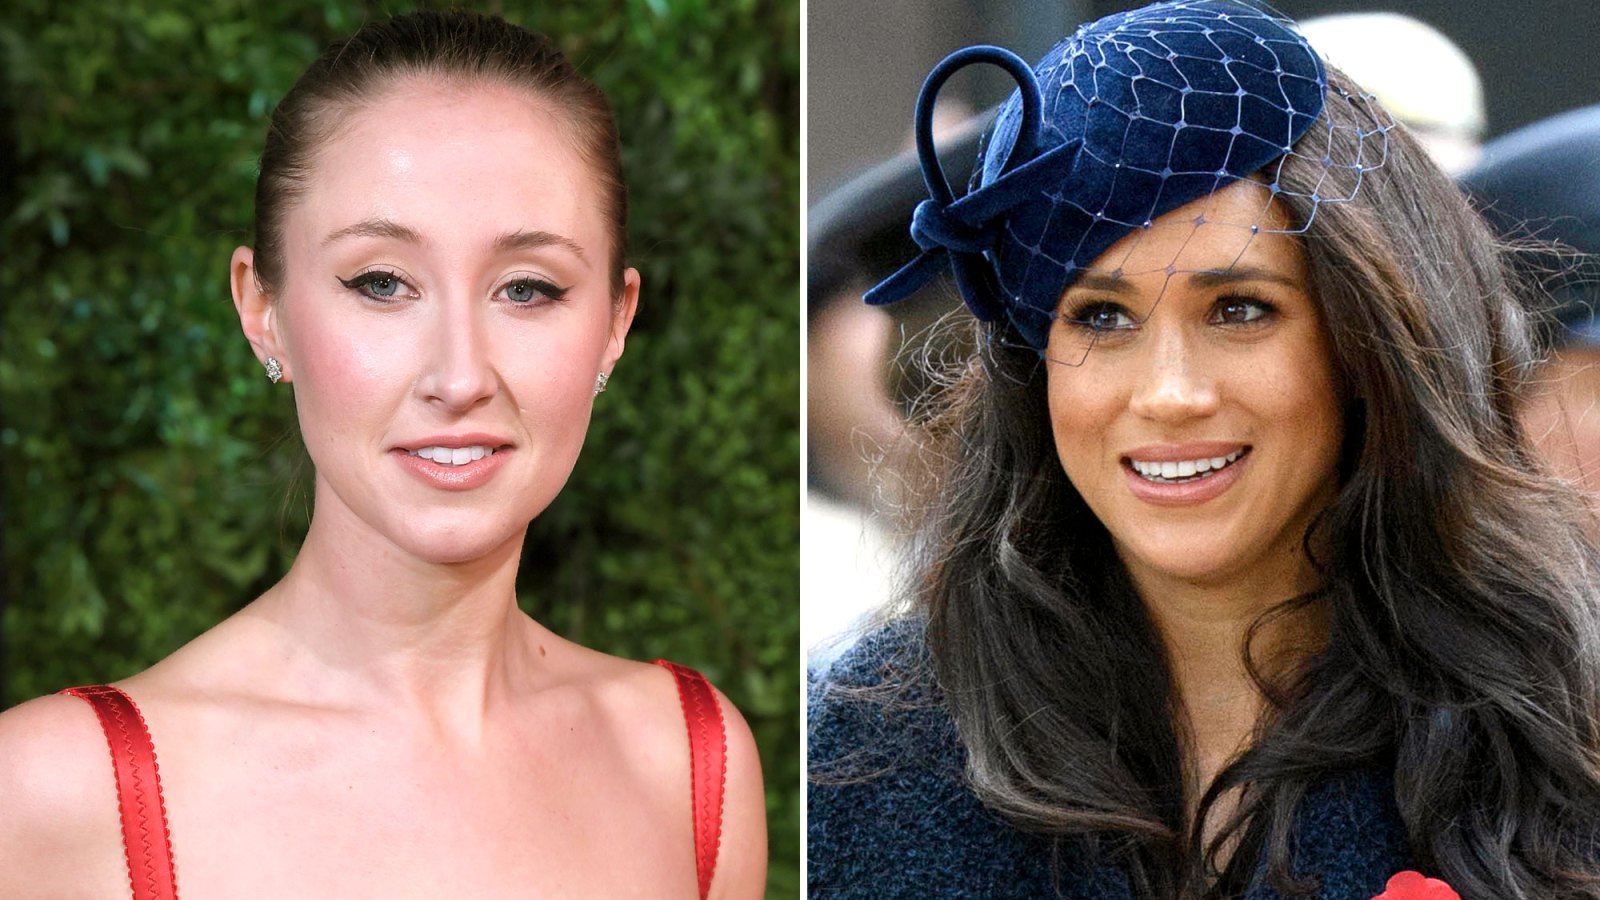 The Crown's Erin Doherty Says She Would 'Crumble Under the Pressure’ Duchess Meghan Is Under